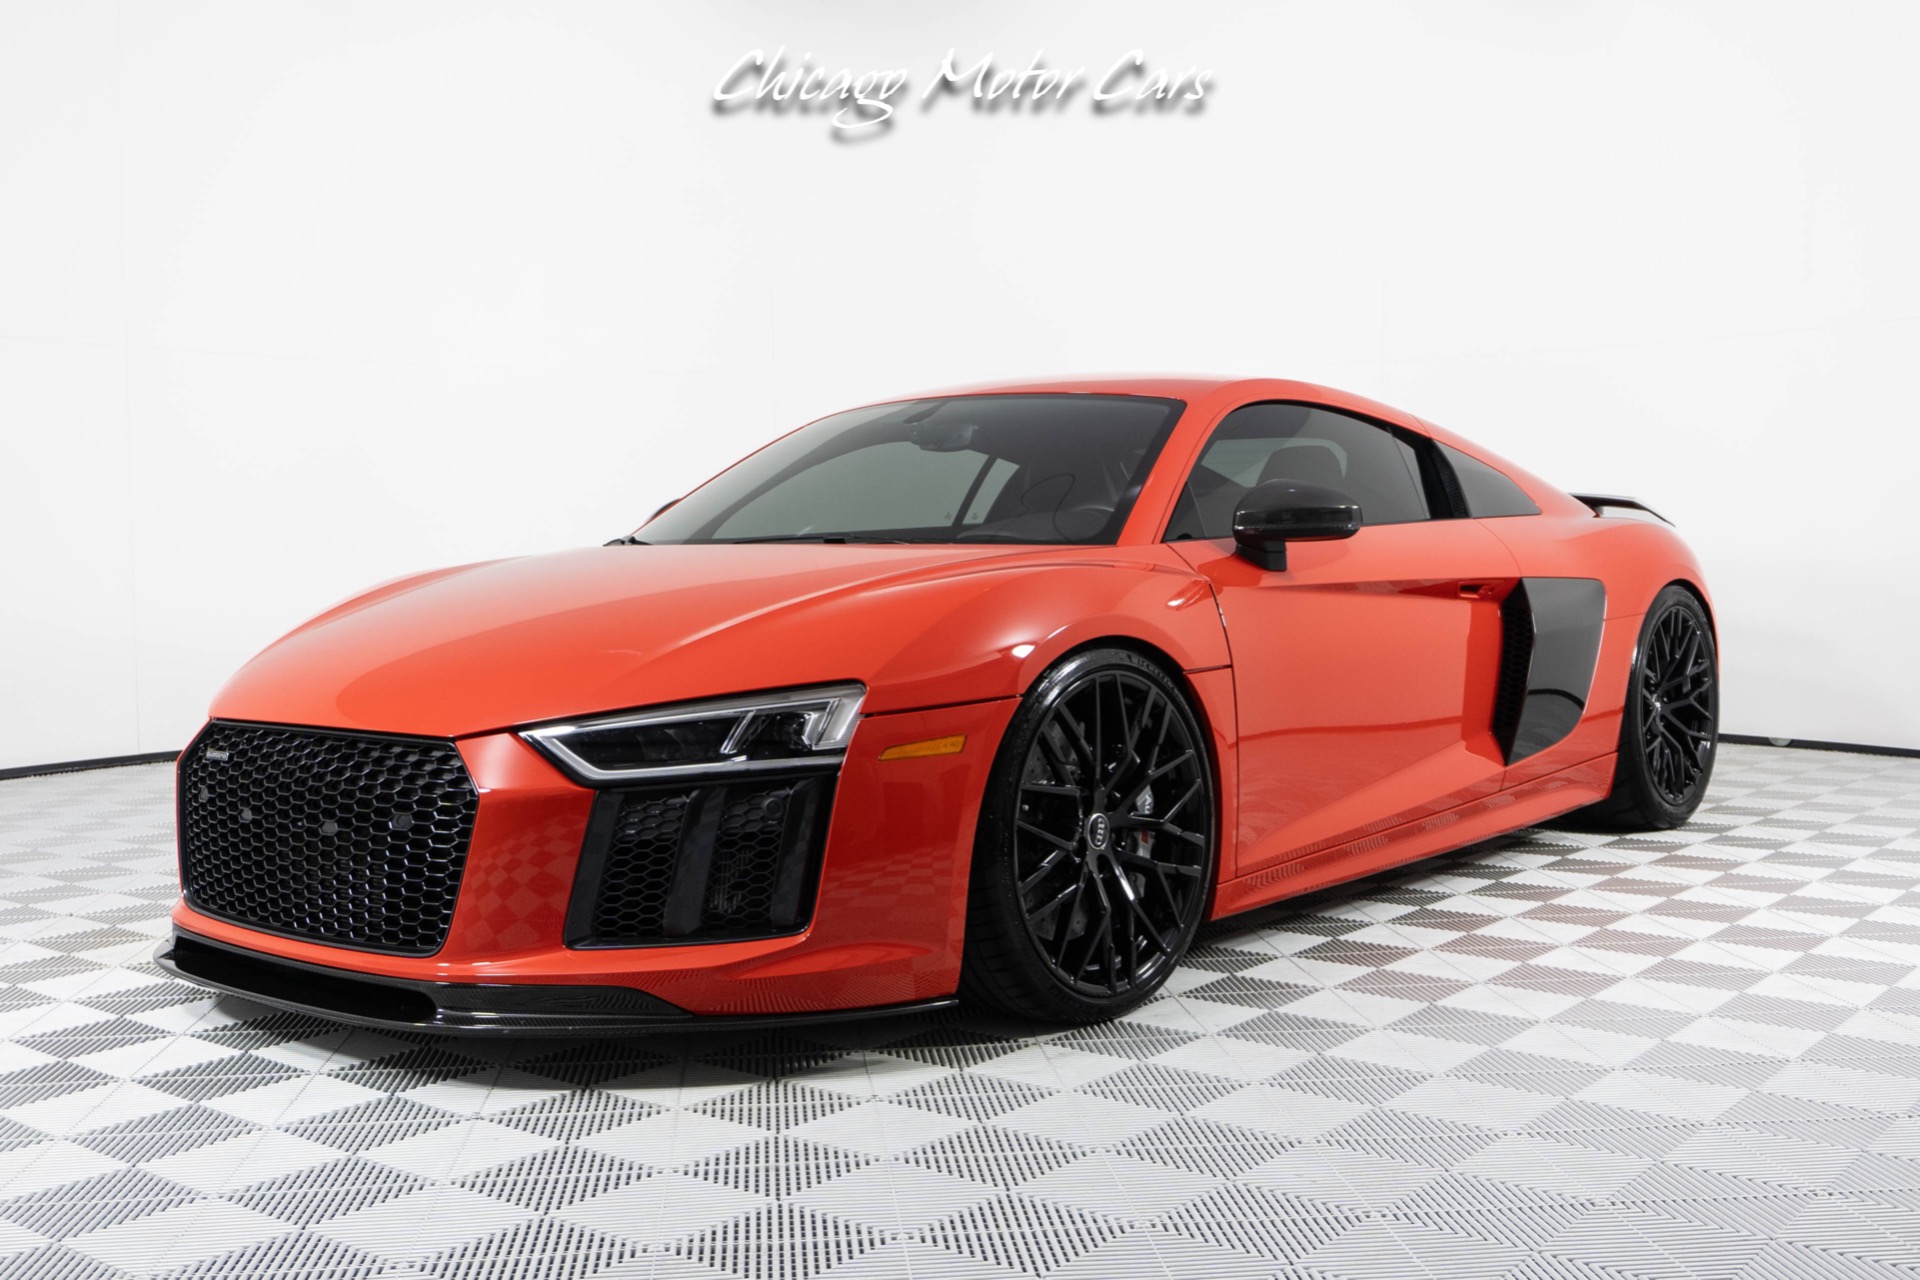 Used-2017-Audi-R8-Quattro-V10-Plus-AMS-Alpha-12-Twin-Turbo-Package-Built-Trans-Full-PPF-Loaded